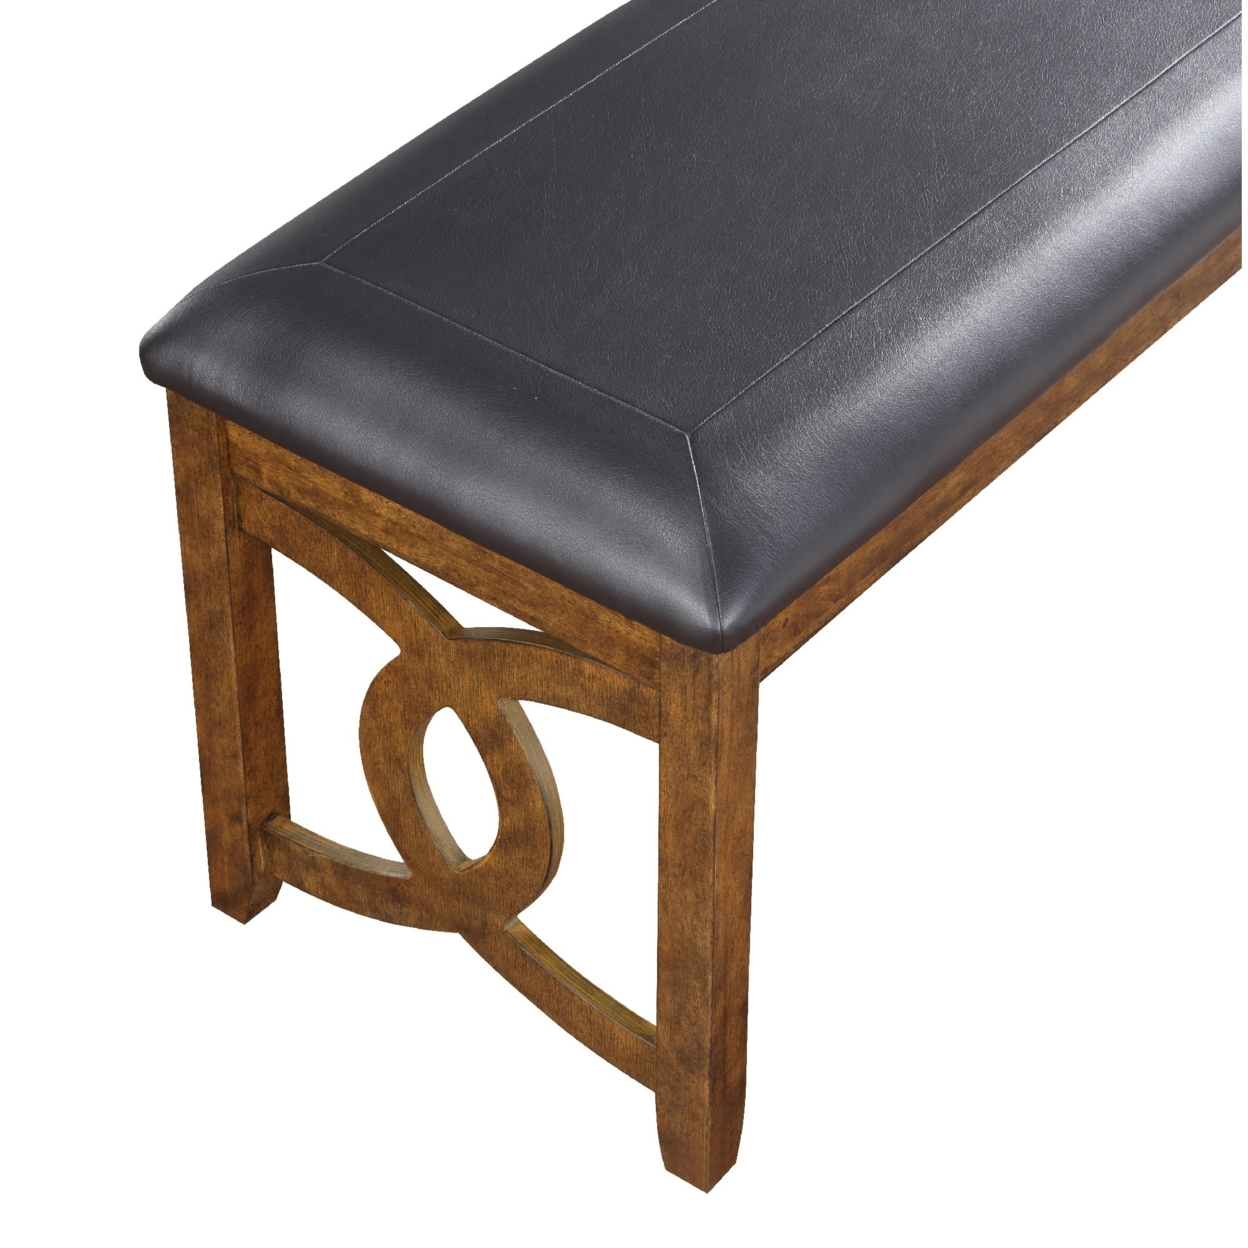 Gary 46 Inch Wood Bench With Leatherette Seat, Brown- Saltoro Sherpi